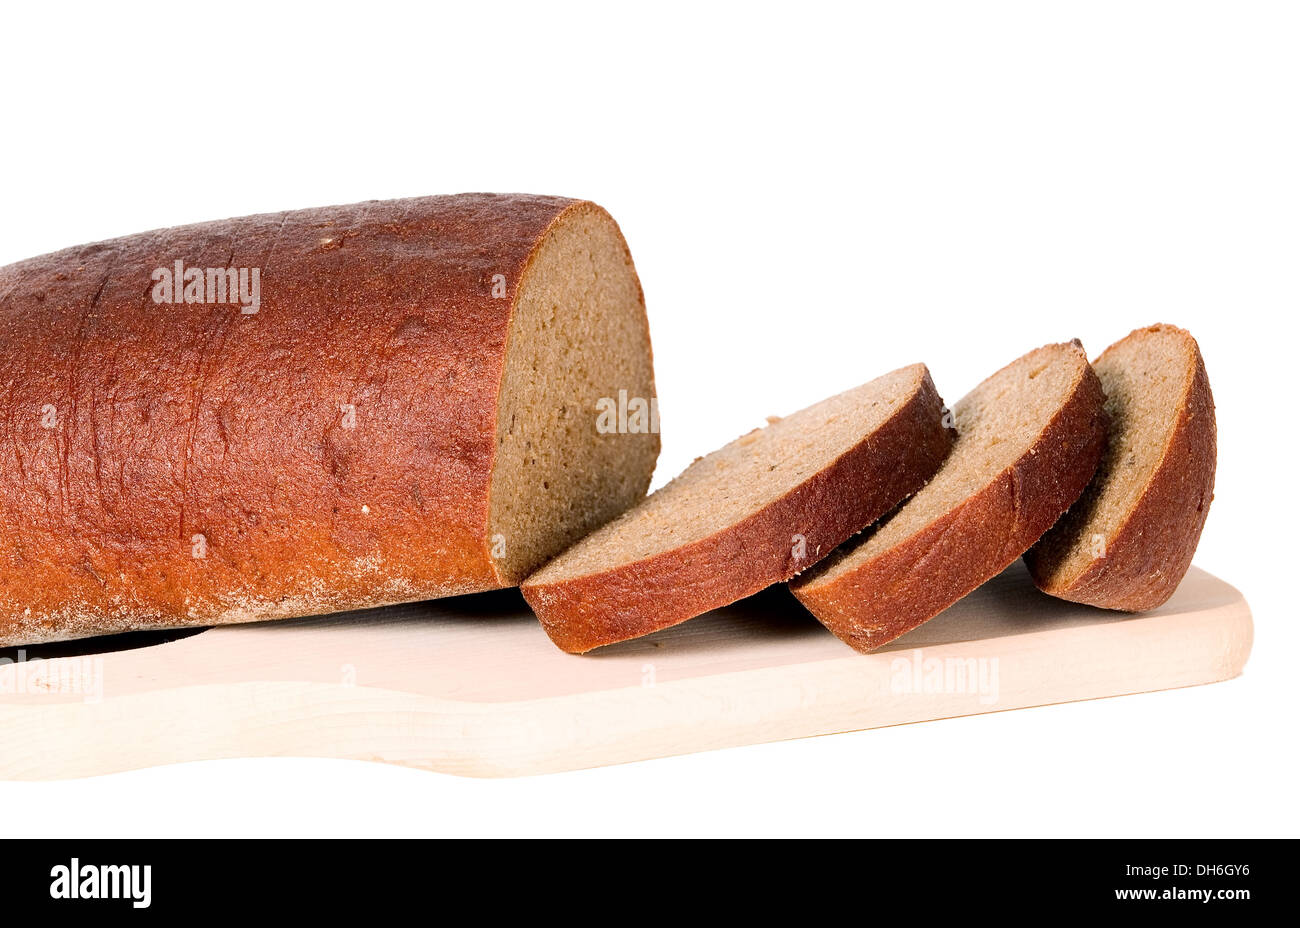 Dark bread with some sliced pieces of it placed on isolated background Stock Photo